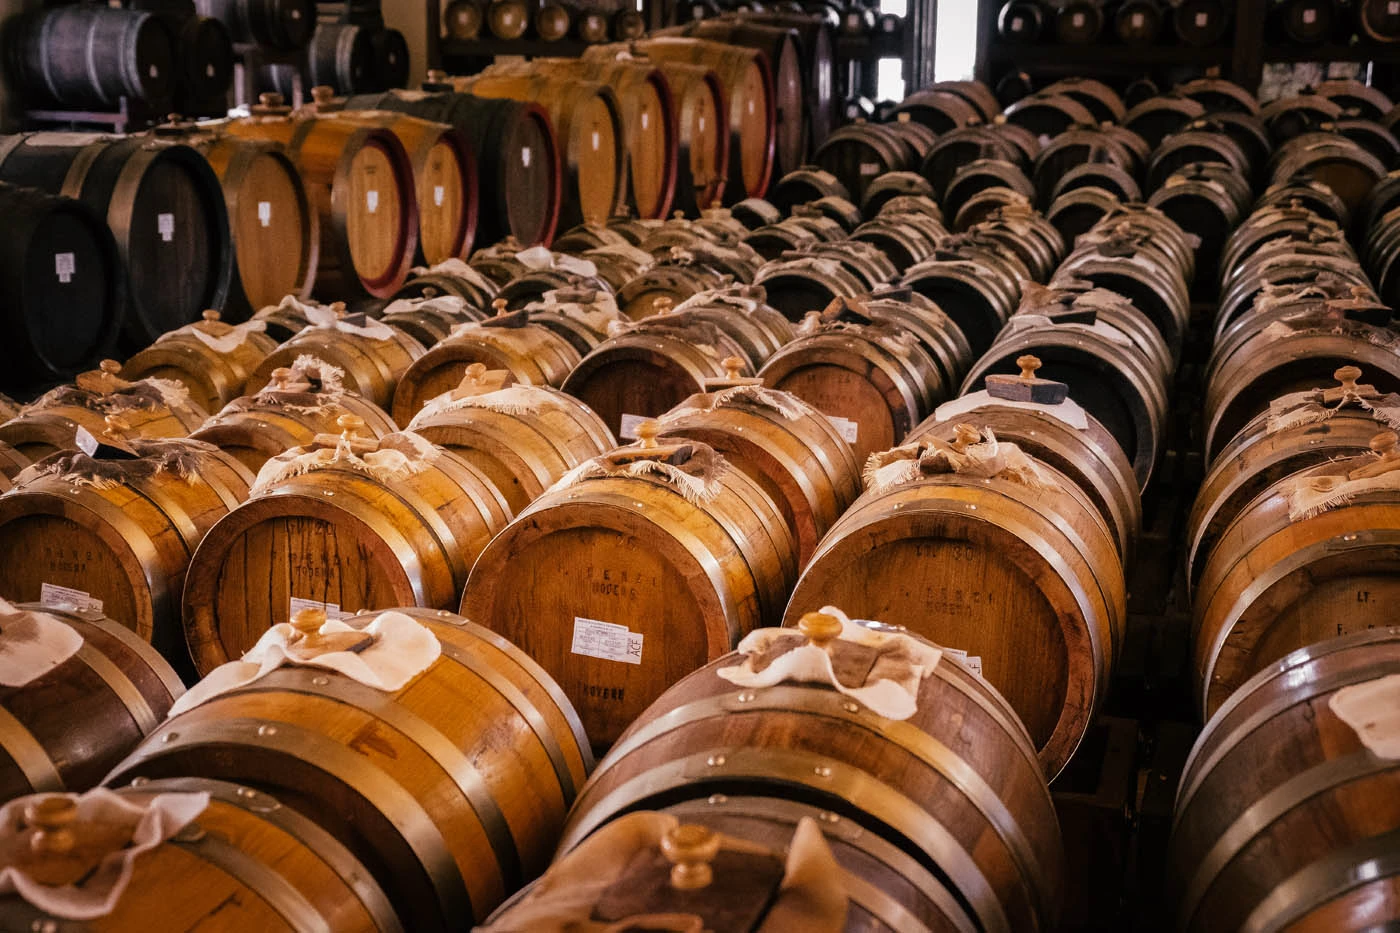 What to Eat in Bologna - Barrels of Aceto Balsamico